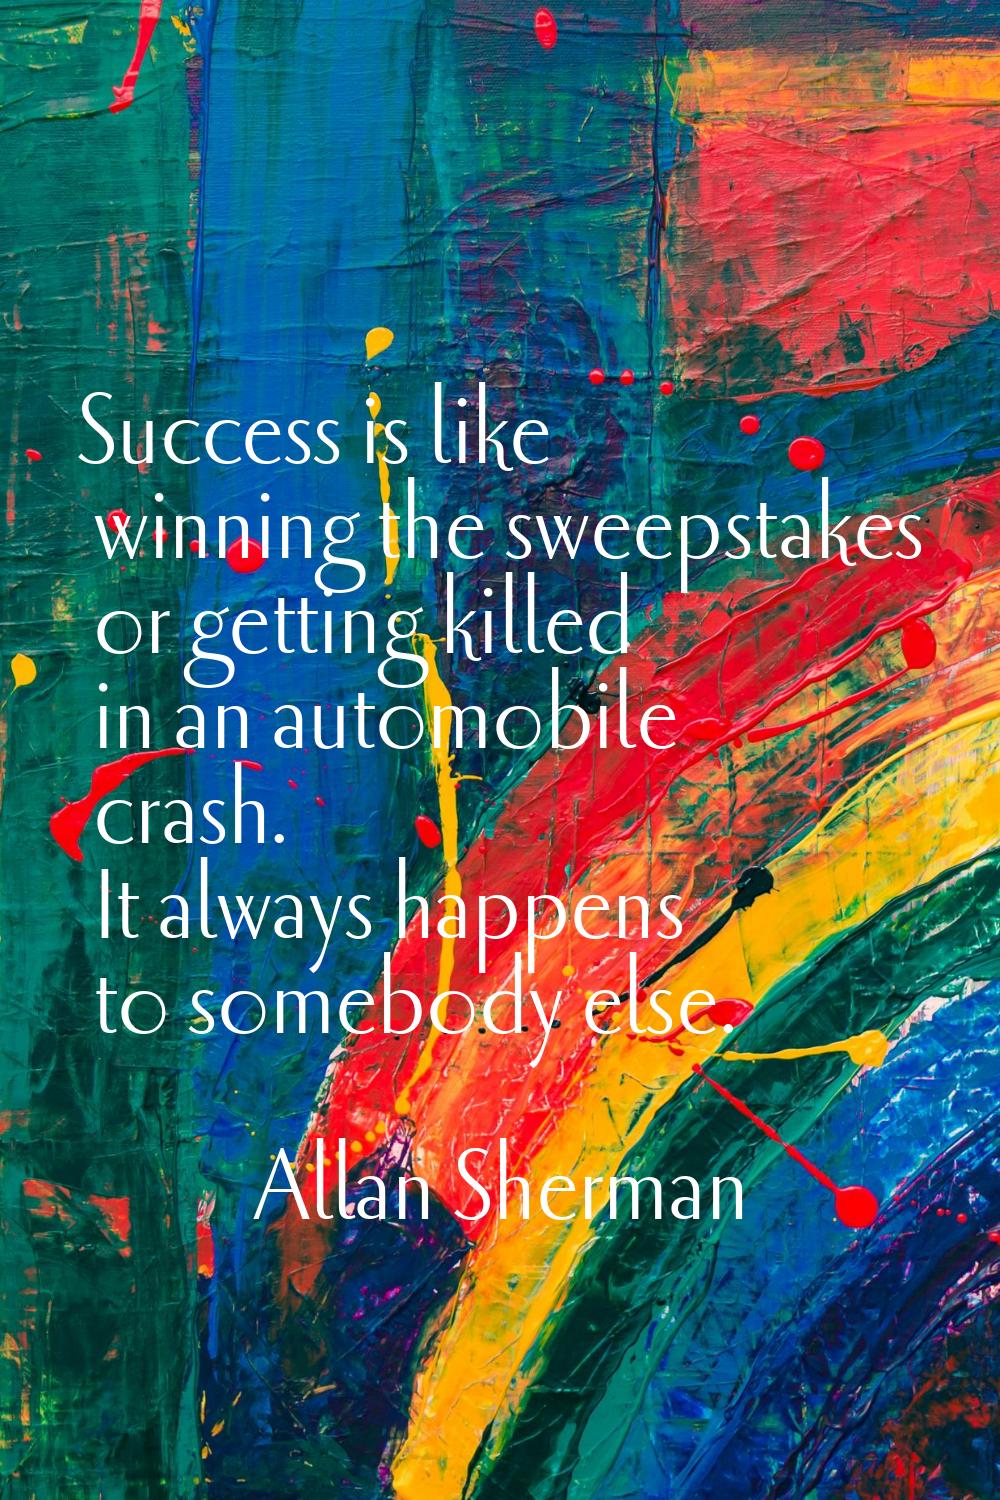 Success is like winning the sweepstakes or getting killed in an automobile crash. It always happens